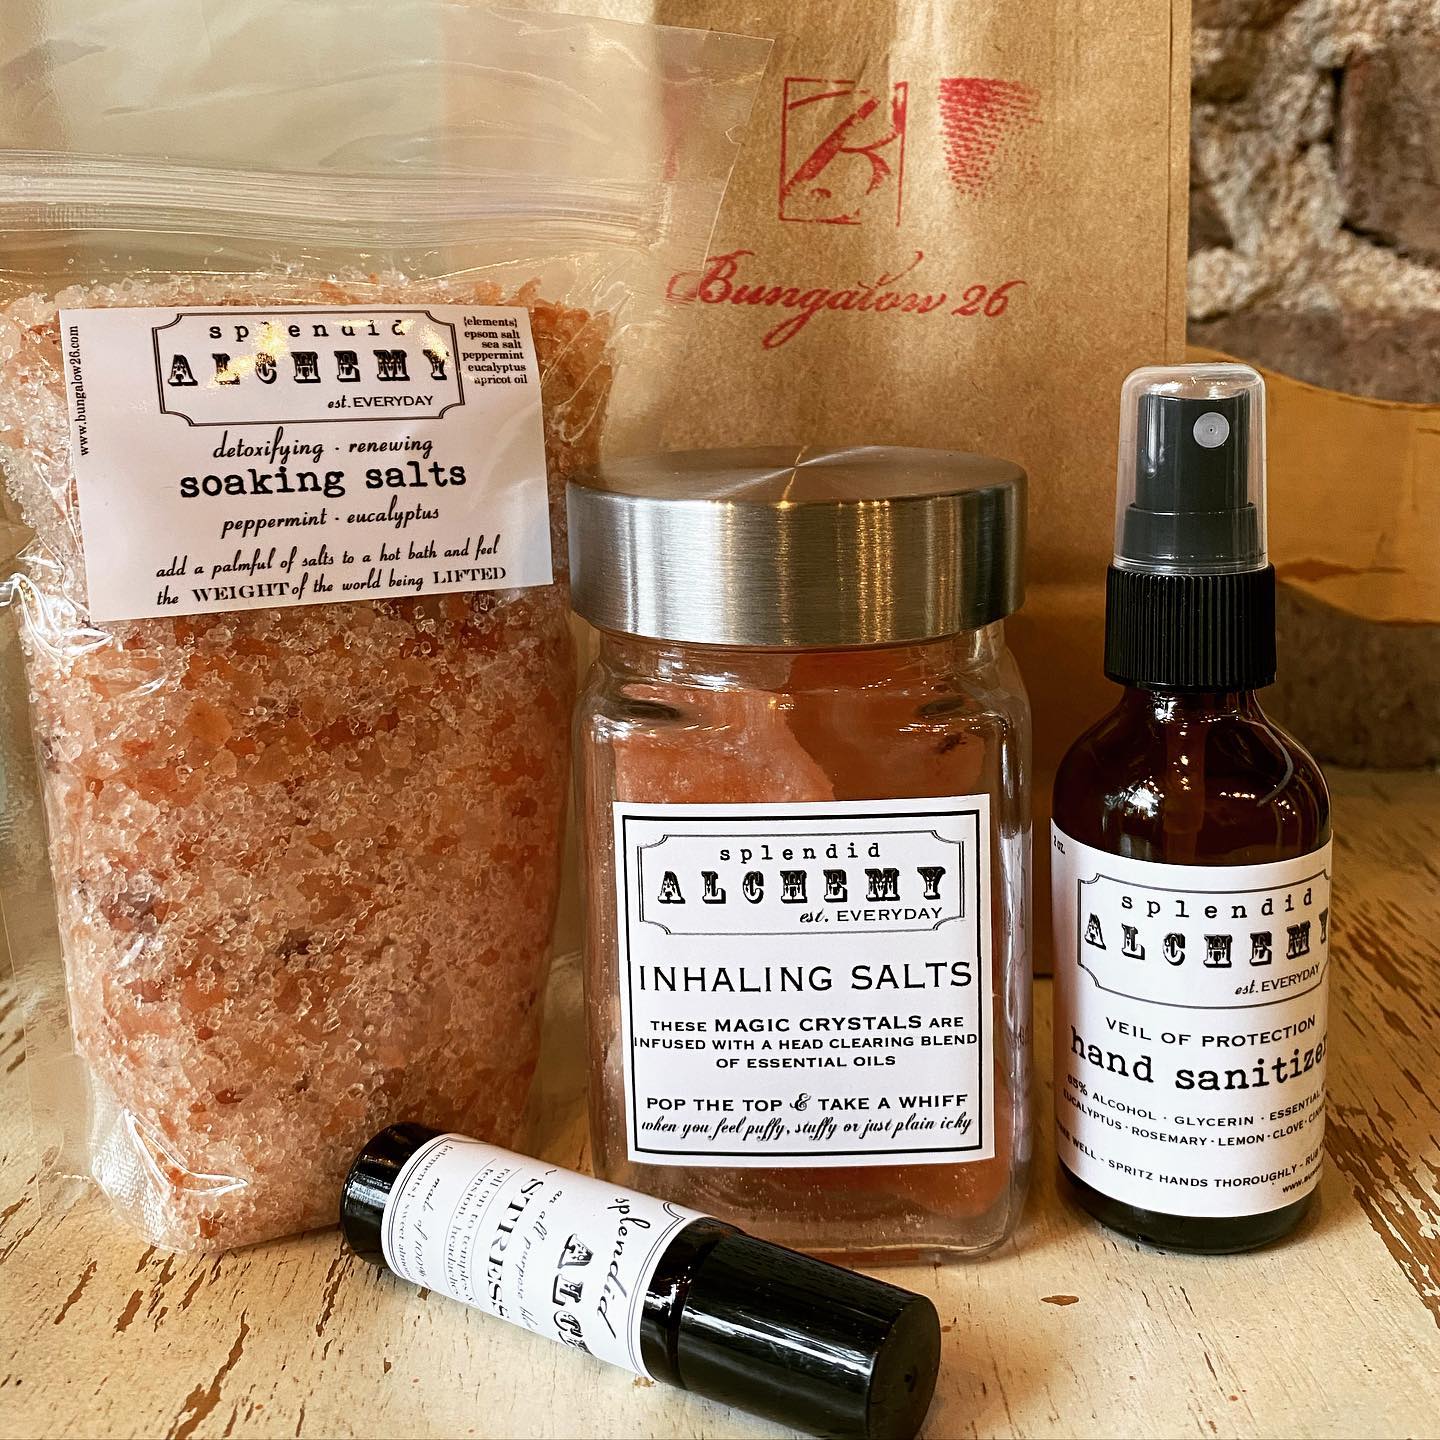 splendid alchemy inhaling salts and other products